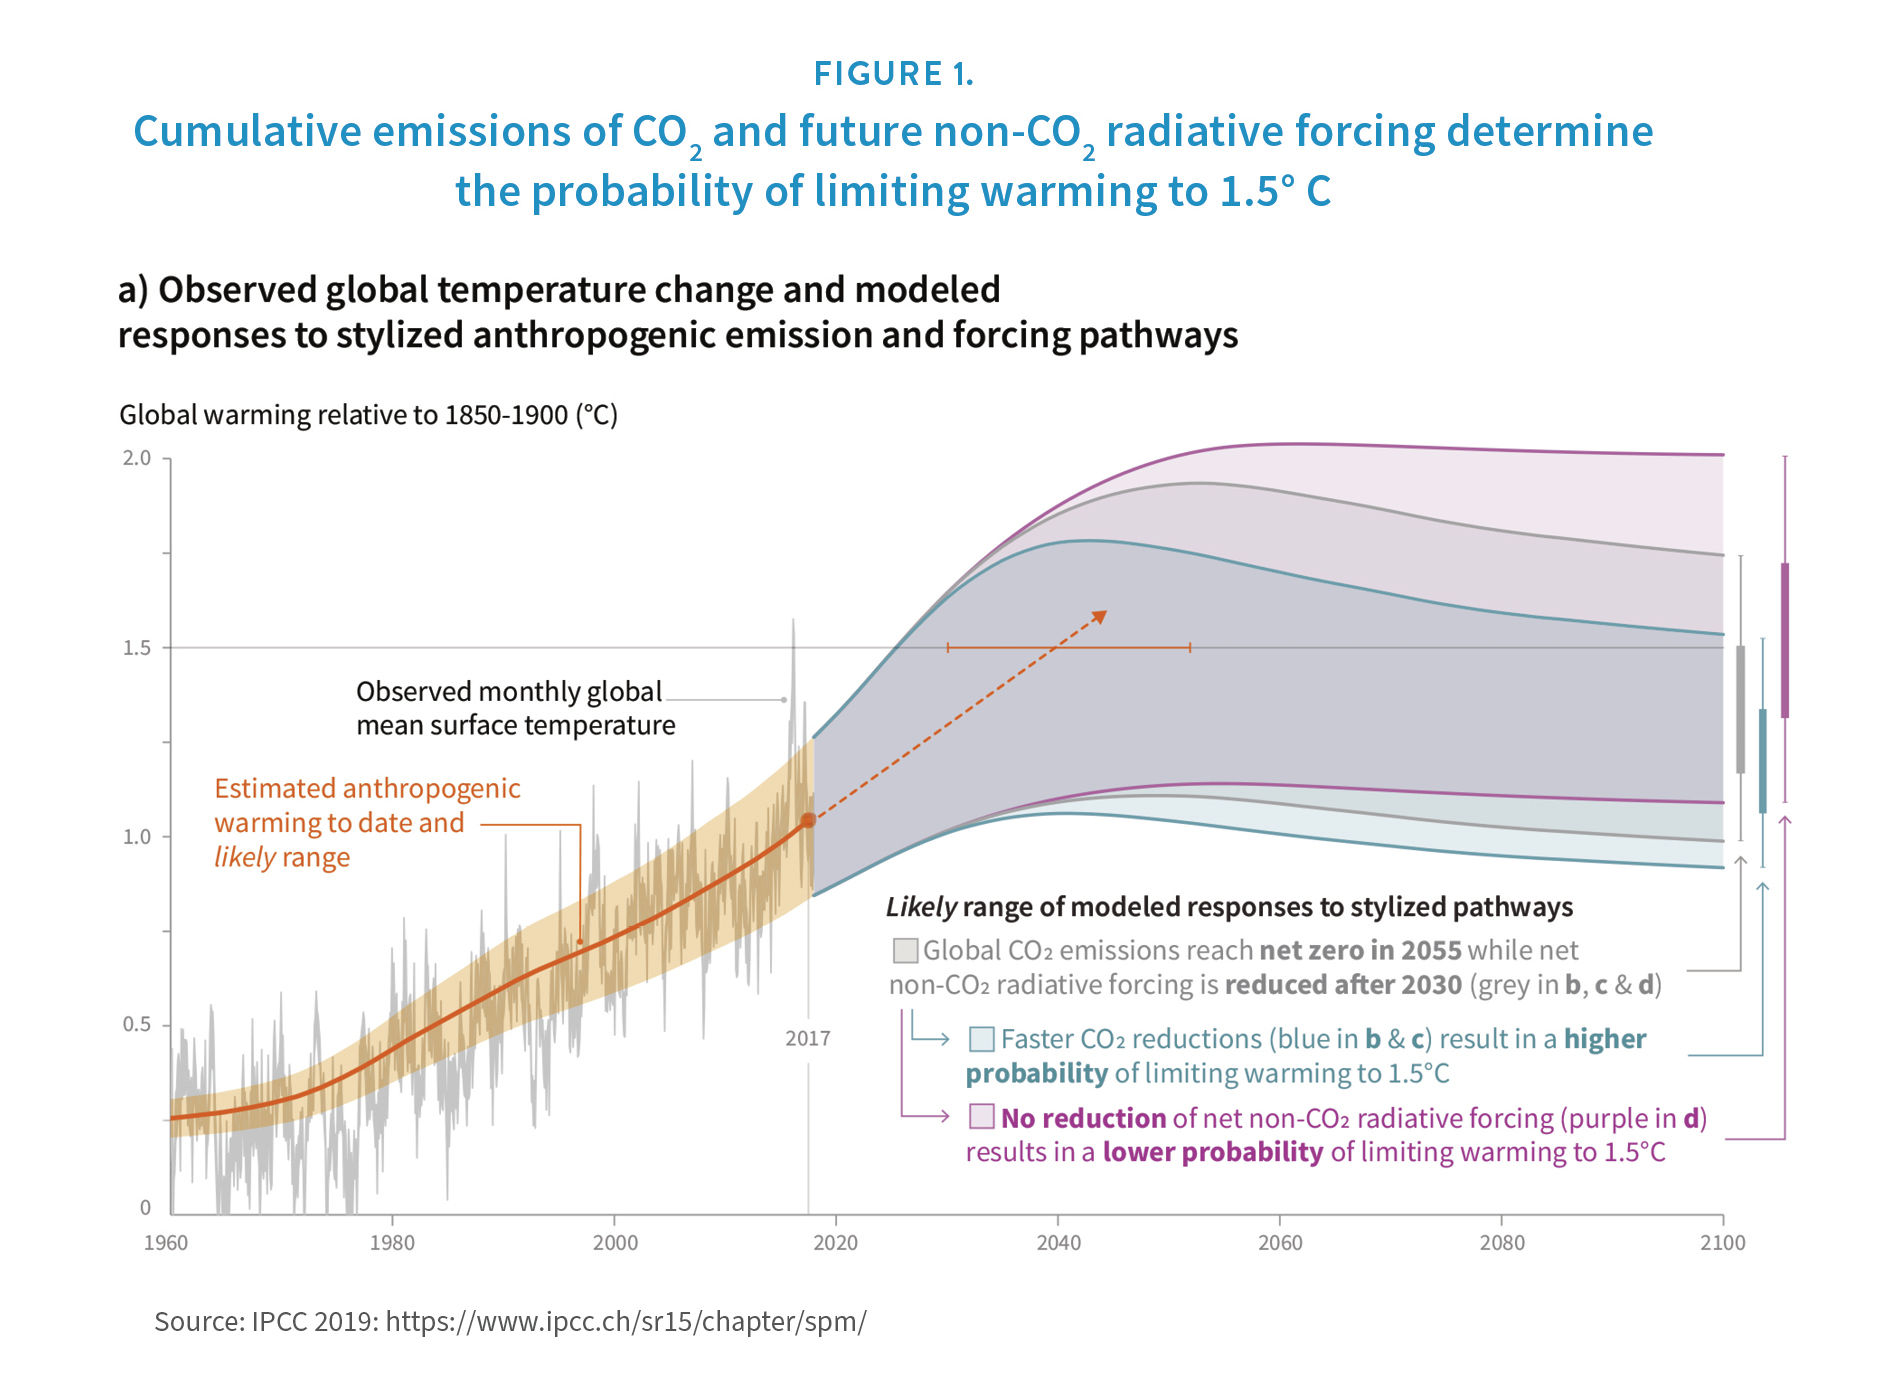 Current & Future Co2 emissions and warming, RGB